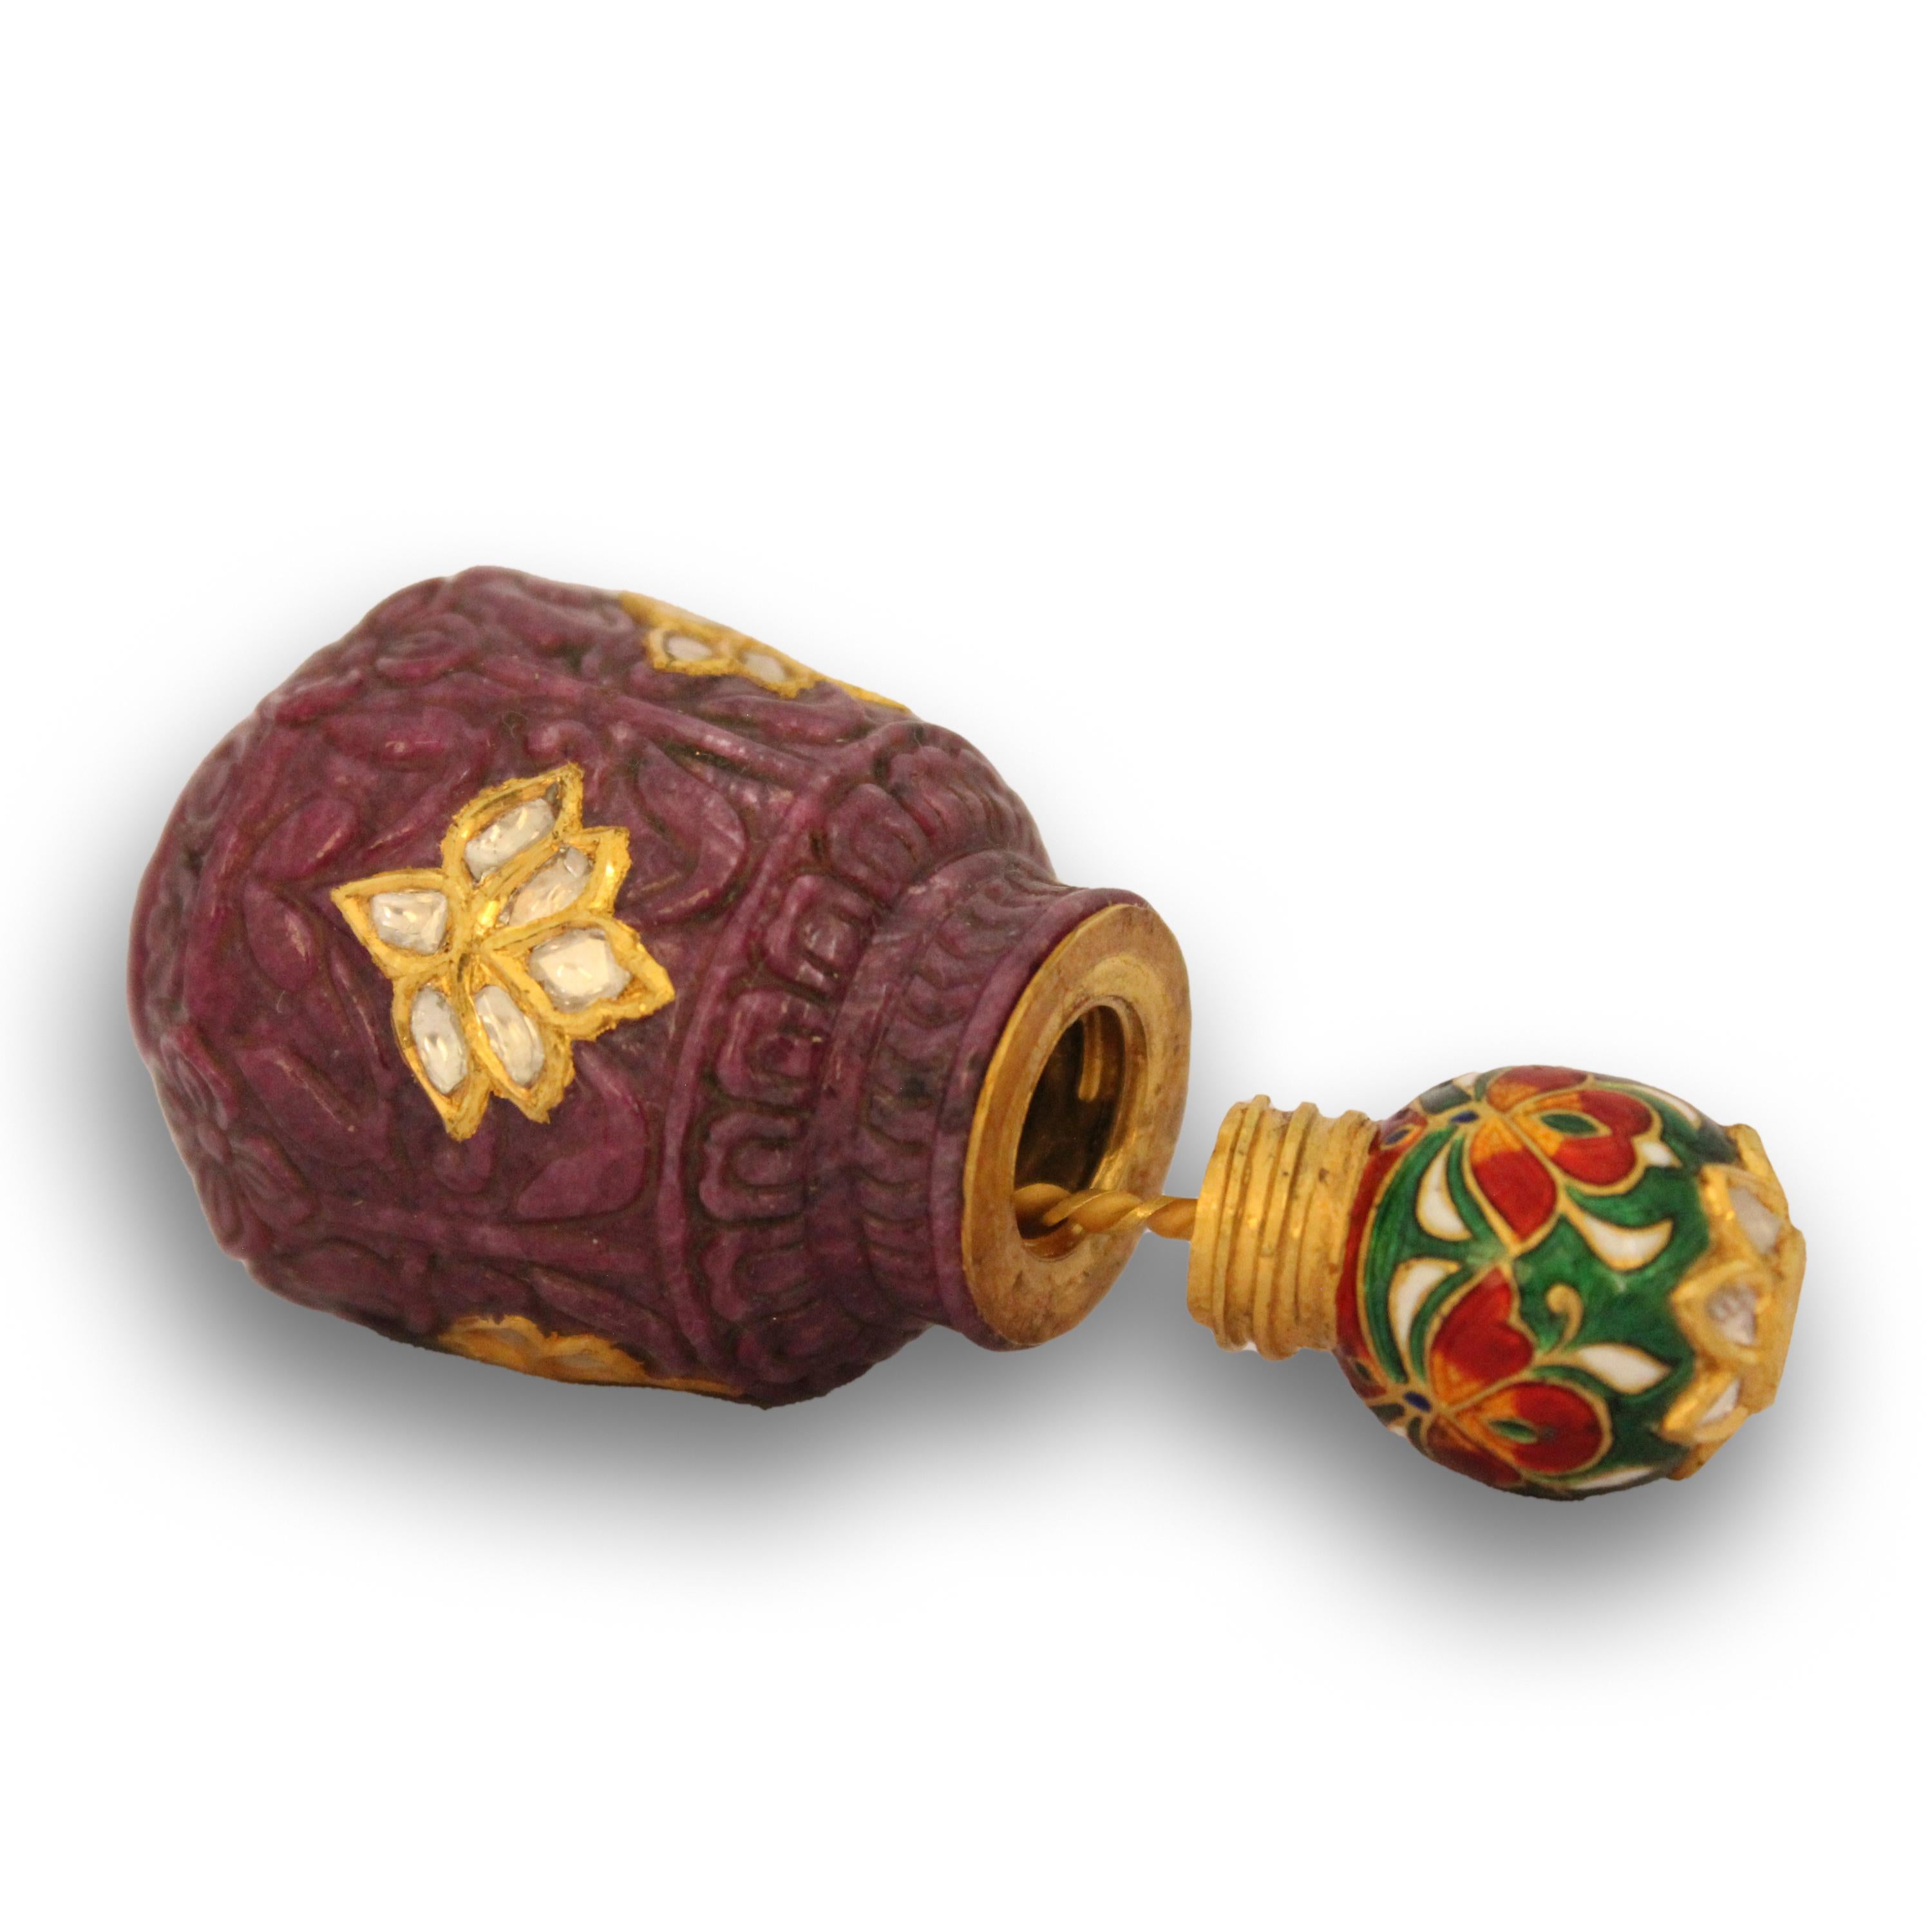 A small rounded bottle is well carved on all sides with flower reserved on a dense ground of leaves. Surrounded at top and bottom with etched motifs of mughal architecture. The stone is perfectly red to justify itself as single ruby piece. Bottle is